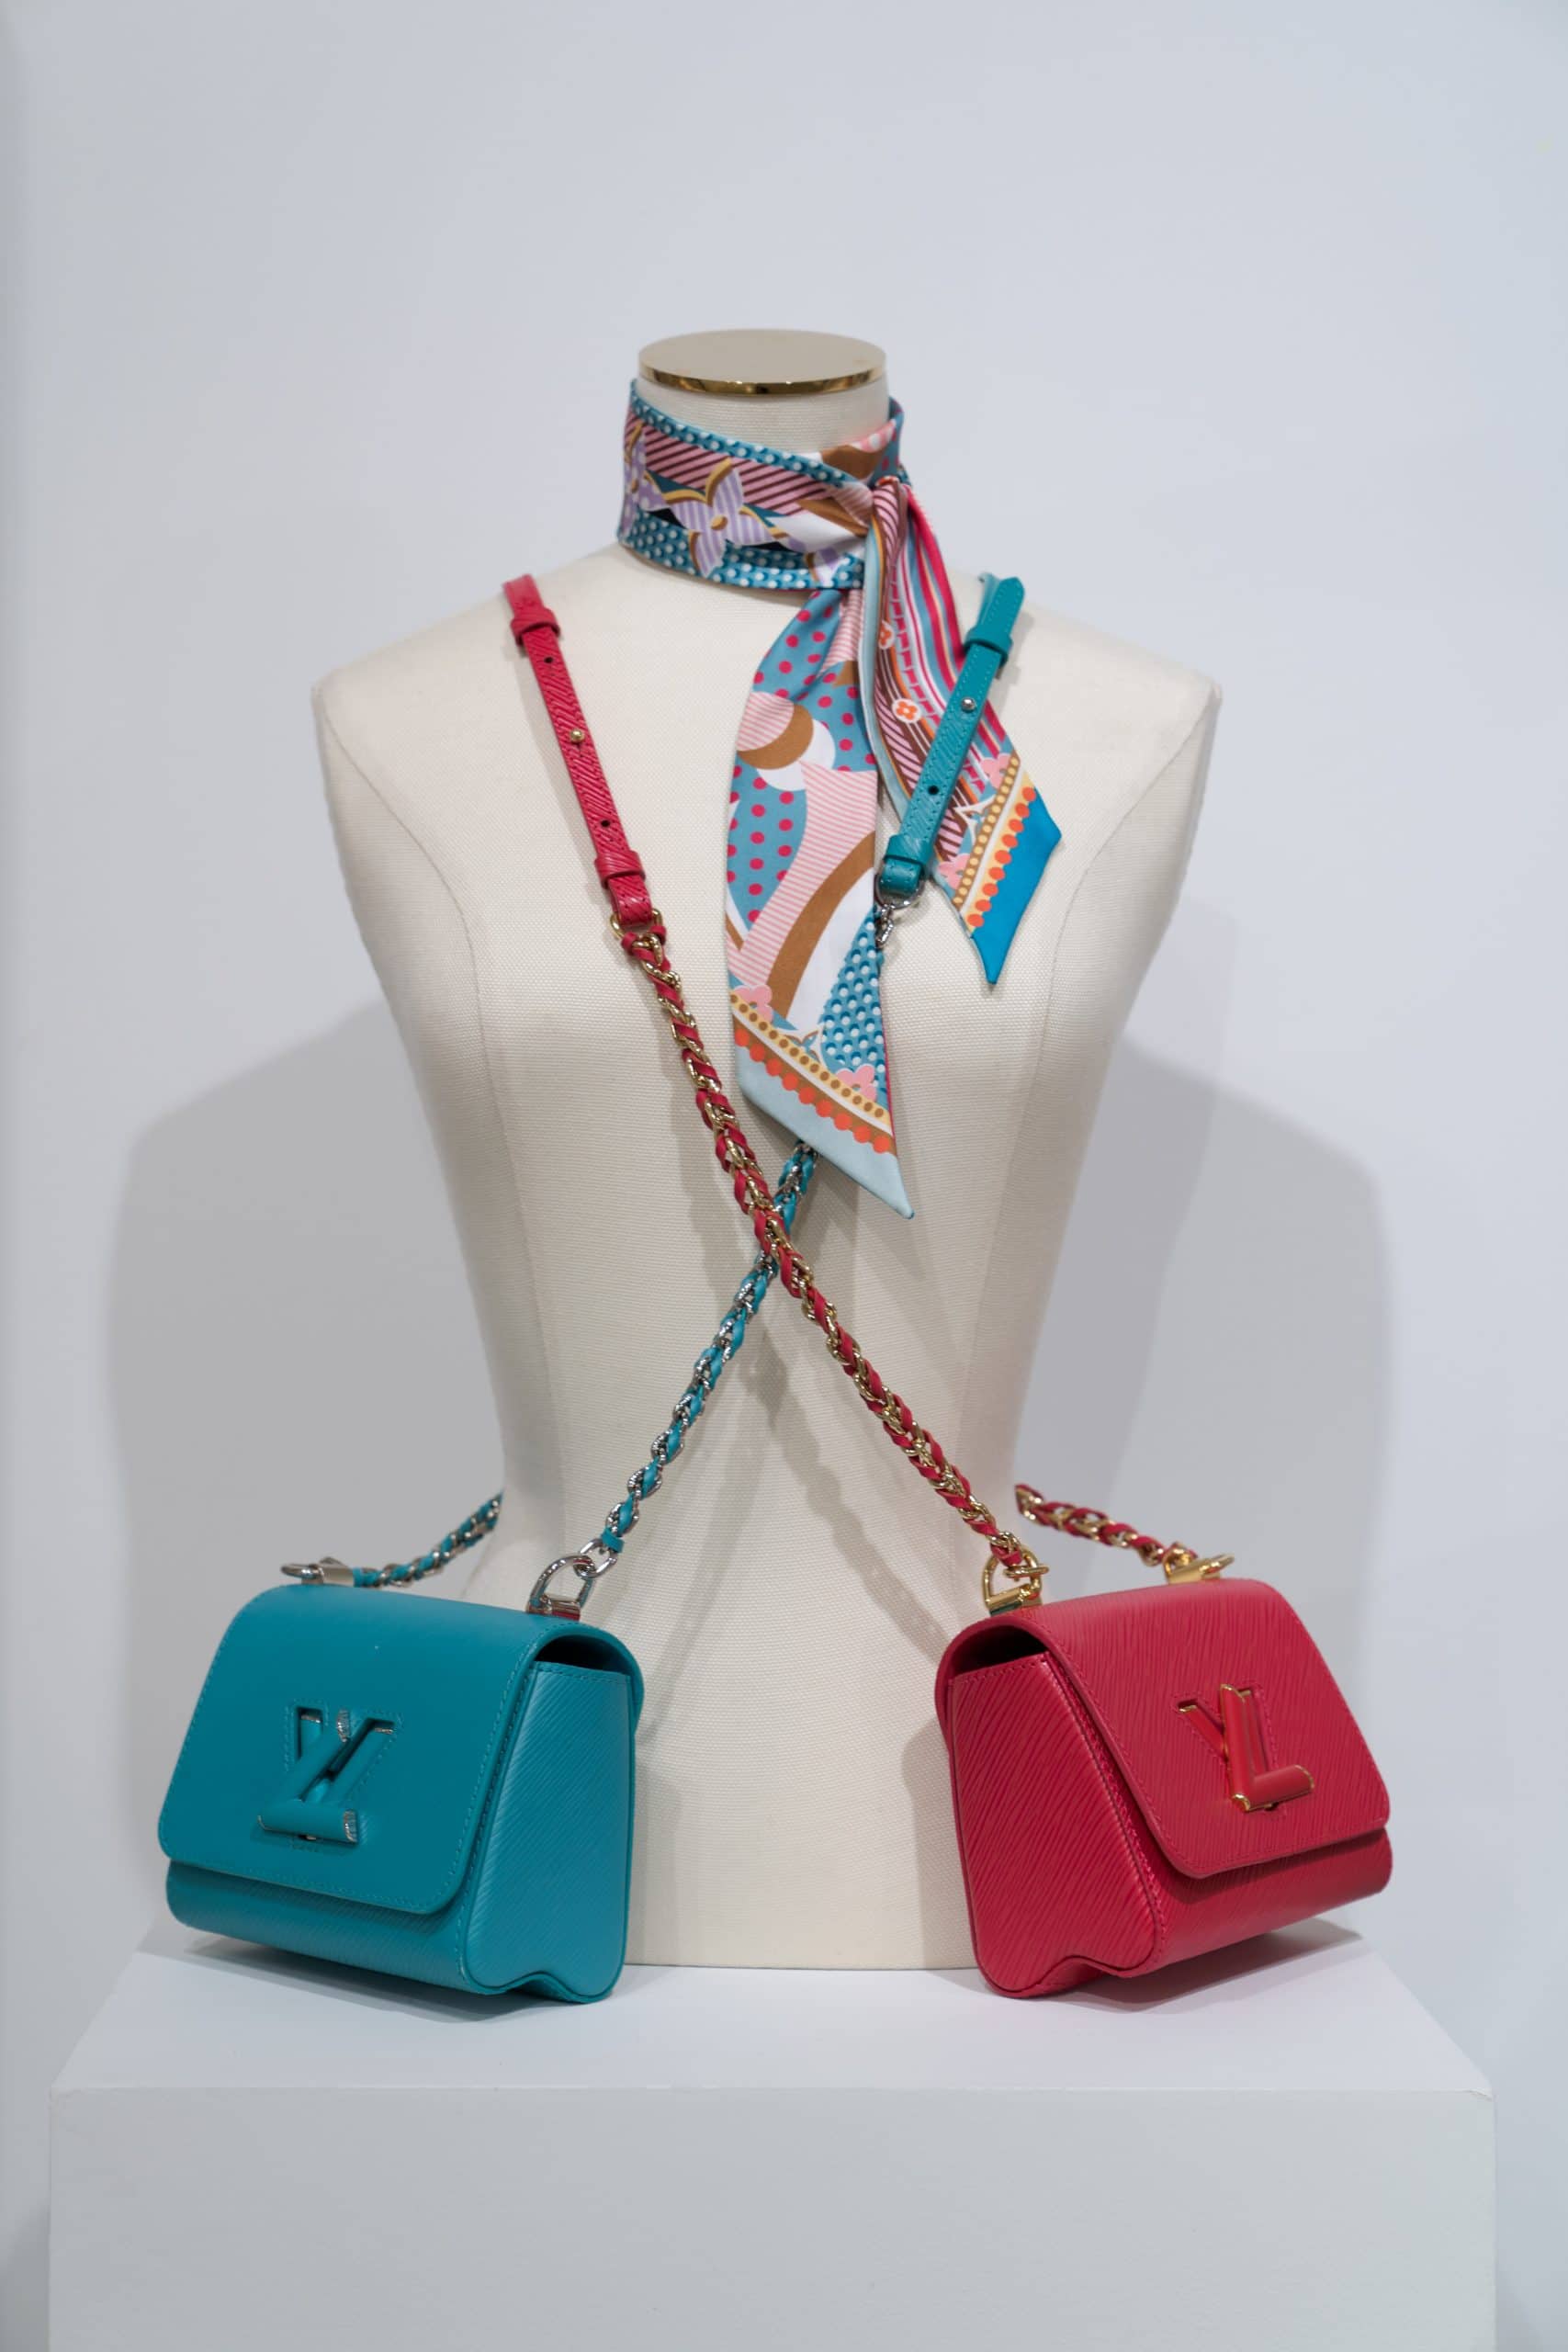 Louis Vuitton unveils “Game On”, a contemplative and playful 2021 Cruise  Collection - LVMH